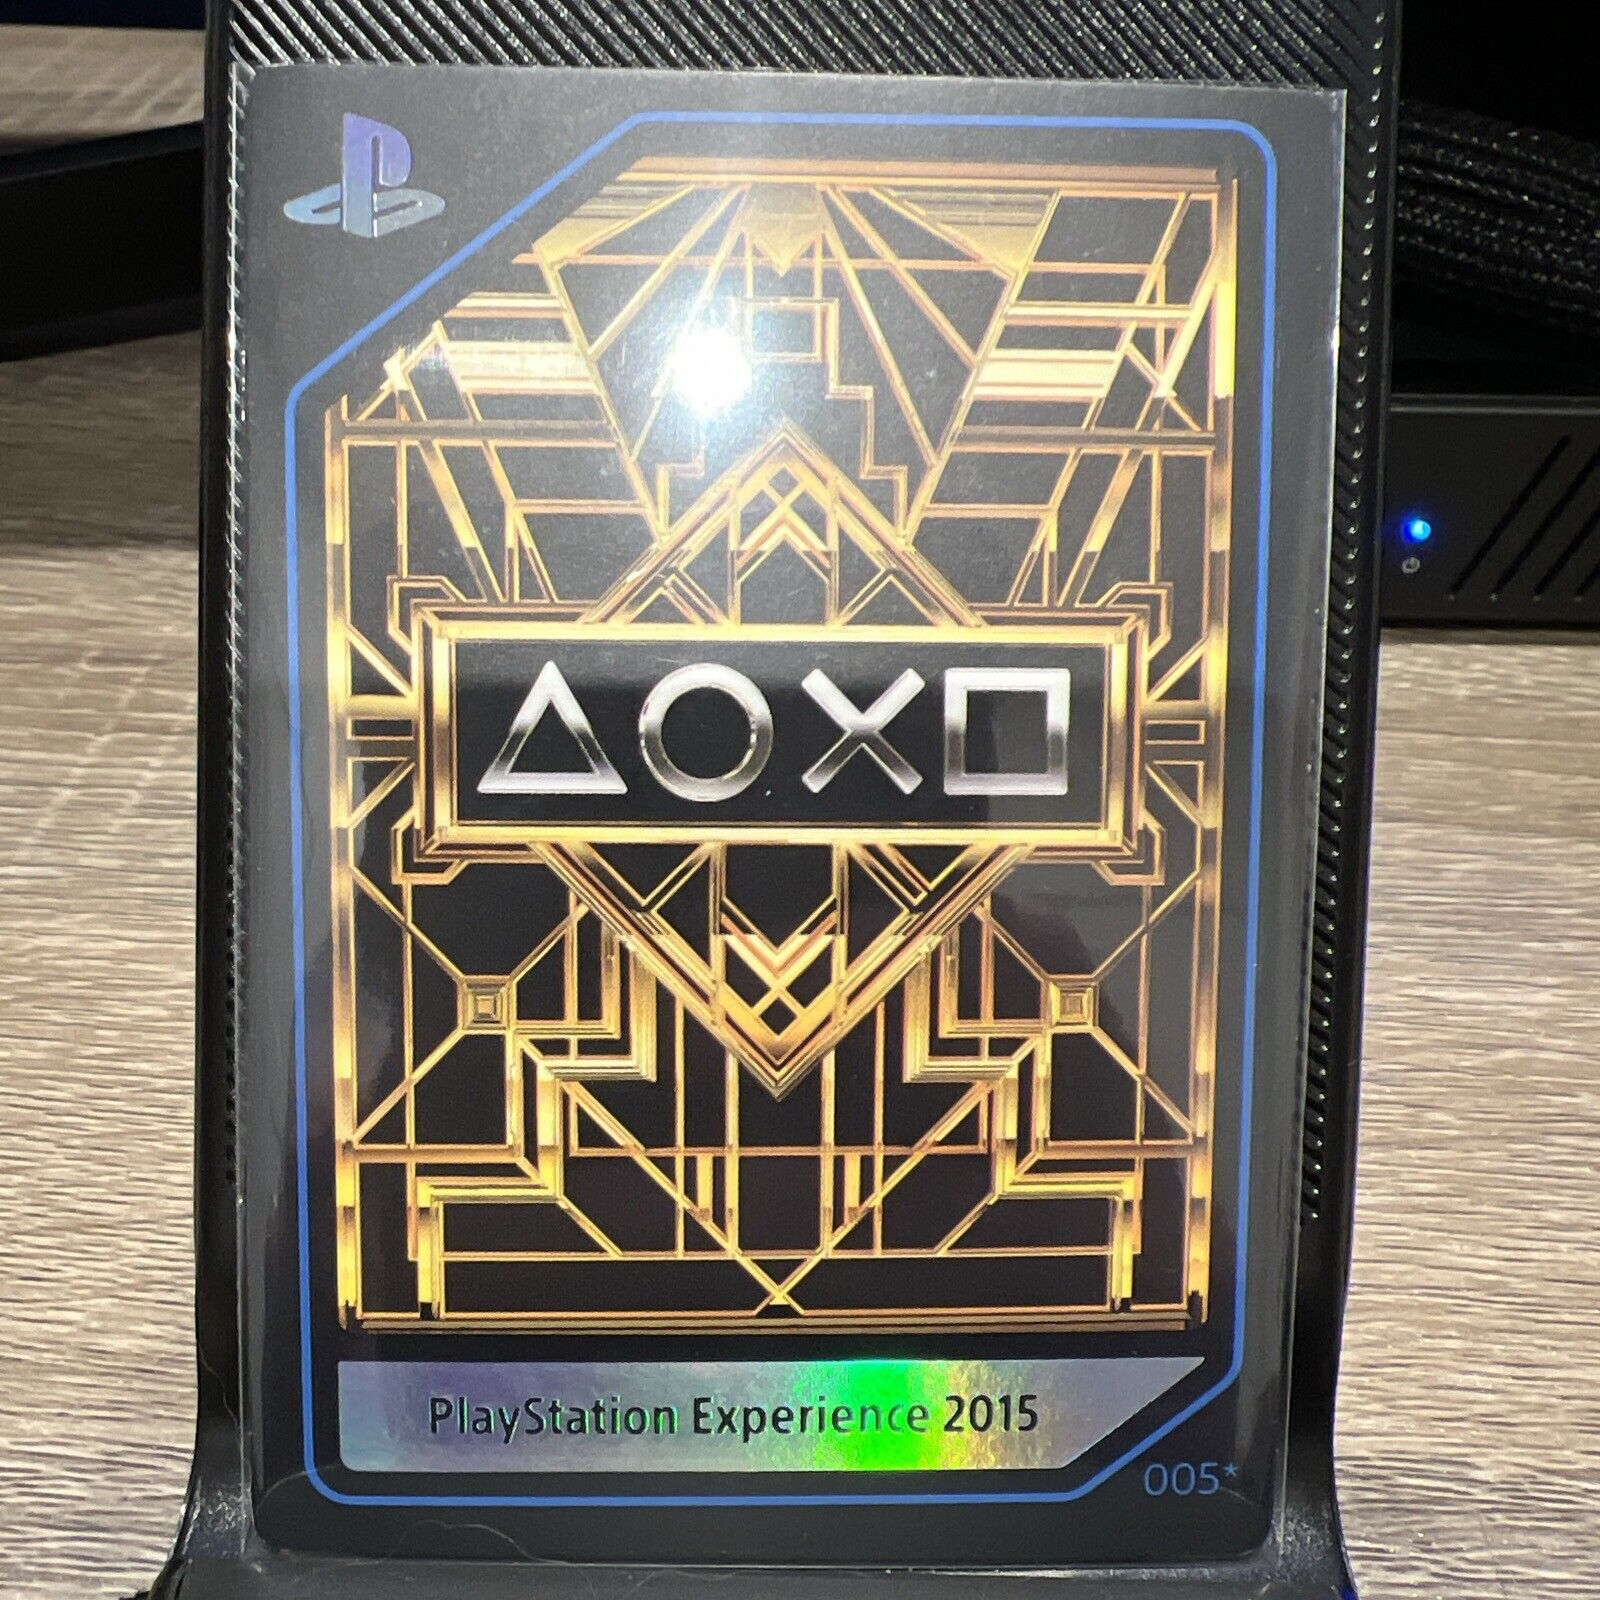 PSX PlayStation Experience 2015 Collectible Card: 005*